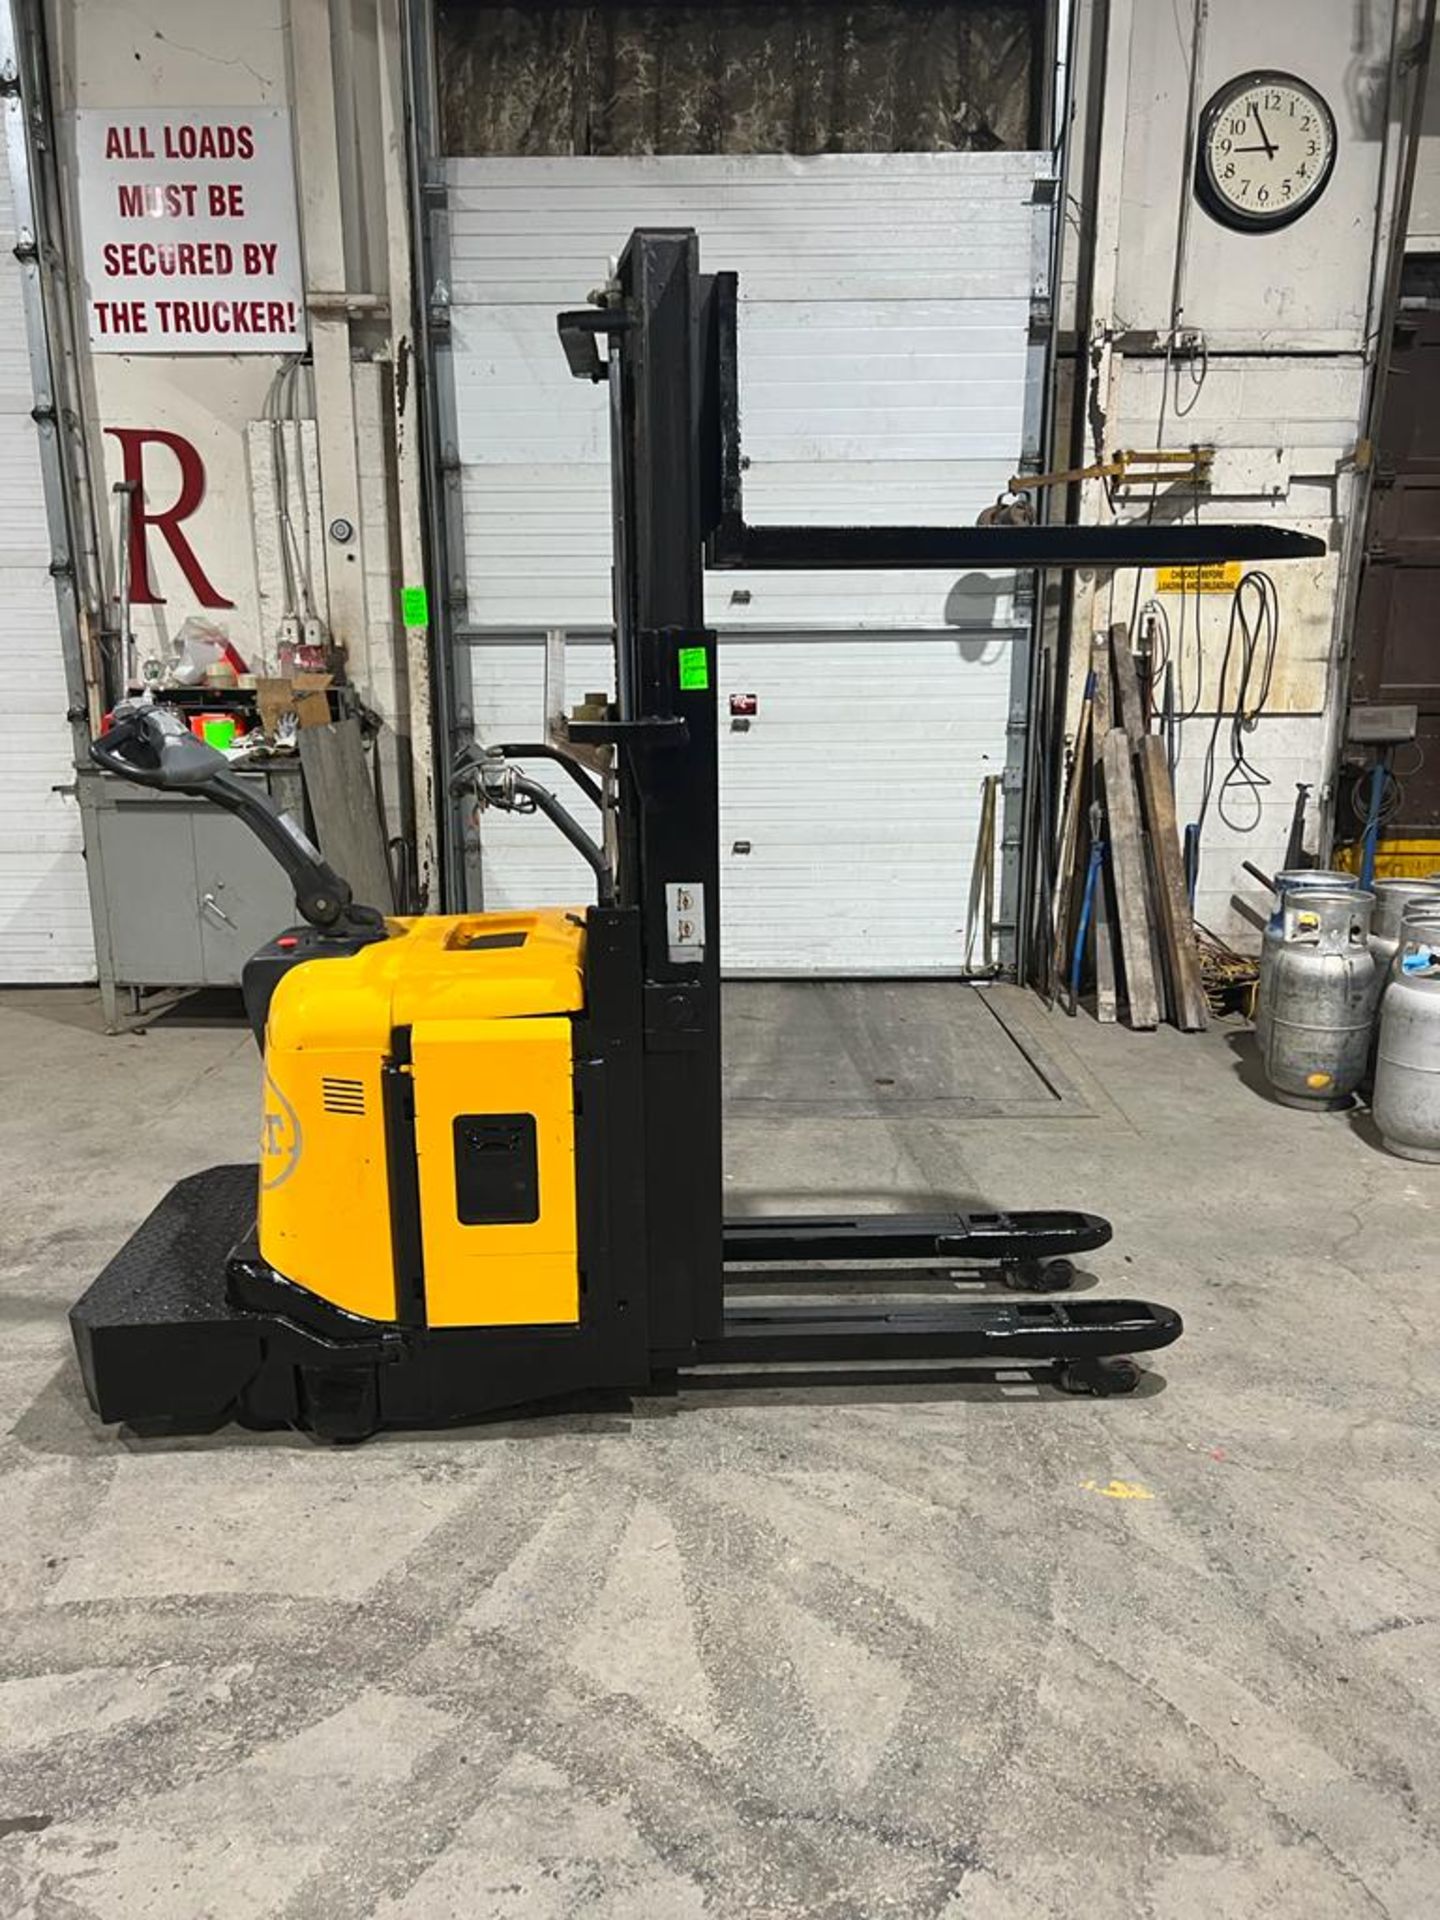 NICE BT Pallet Stacker RIDE ON 5000lbs capacity electric Powered Pallet Cart 24V with LOW HOURS FREE - Image 3 of 6